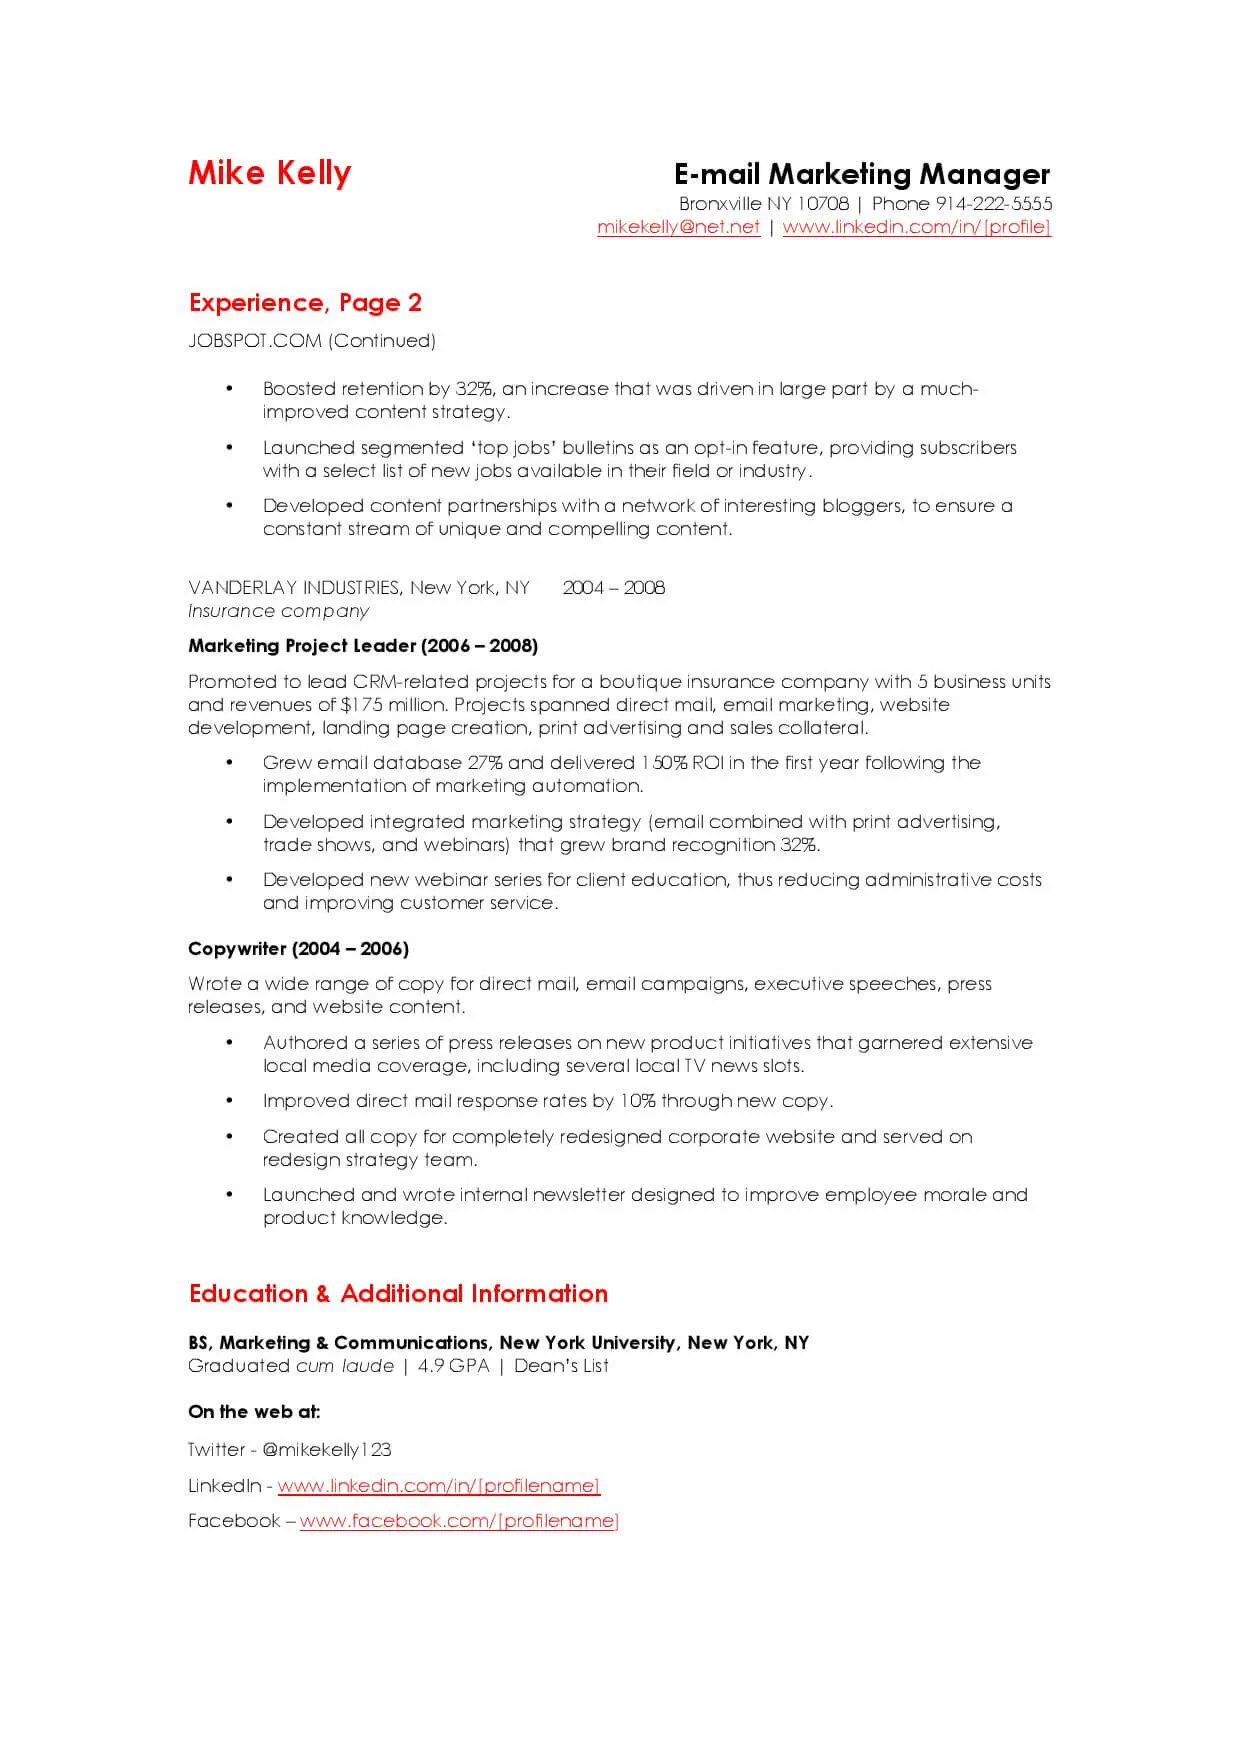 Email Marketing Manager resume example